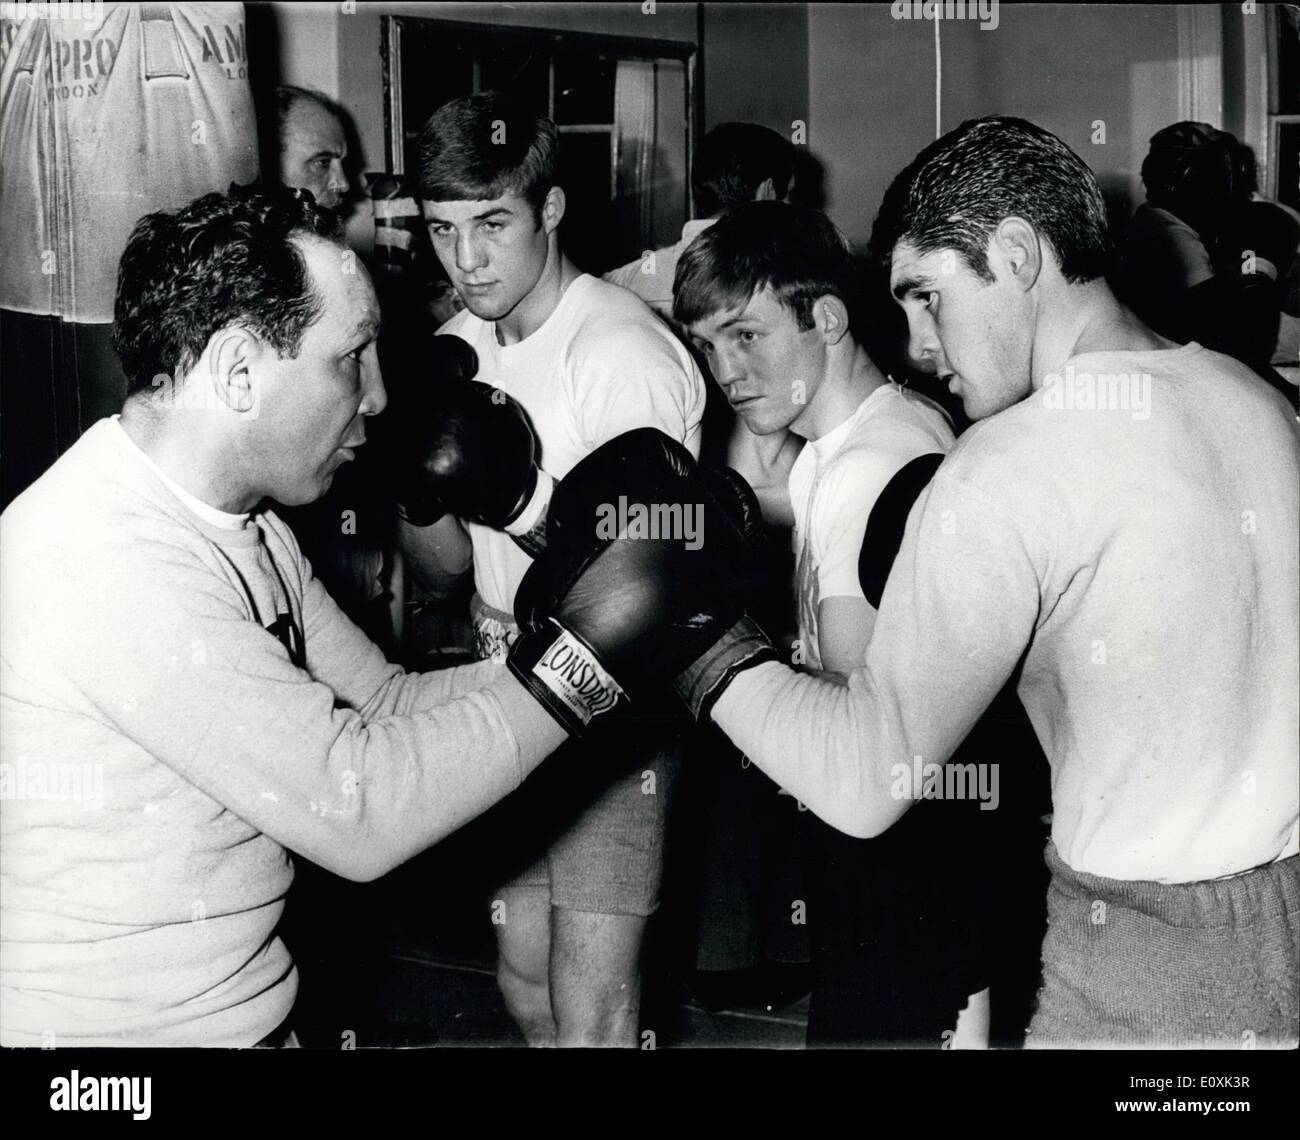 Feb. 02, 1967 - Tips from a Former World Champion. Photo Shows: Willie Pep, the former world featherweight champion, who is over here as a guest of the Anglo American Sporting Club, seen (on left) giving a few tips to British hopefuls, Mark Rowe, Alan Rudkin and Jimmy Anderson, at Freddie Hill's gym in King's Cross, London yesterday. Stock Photo